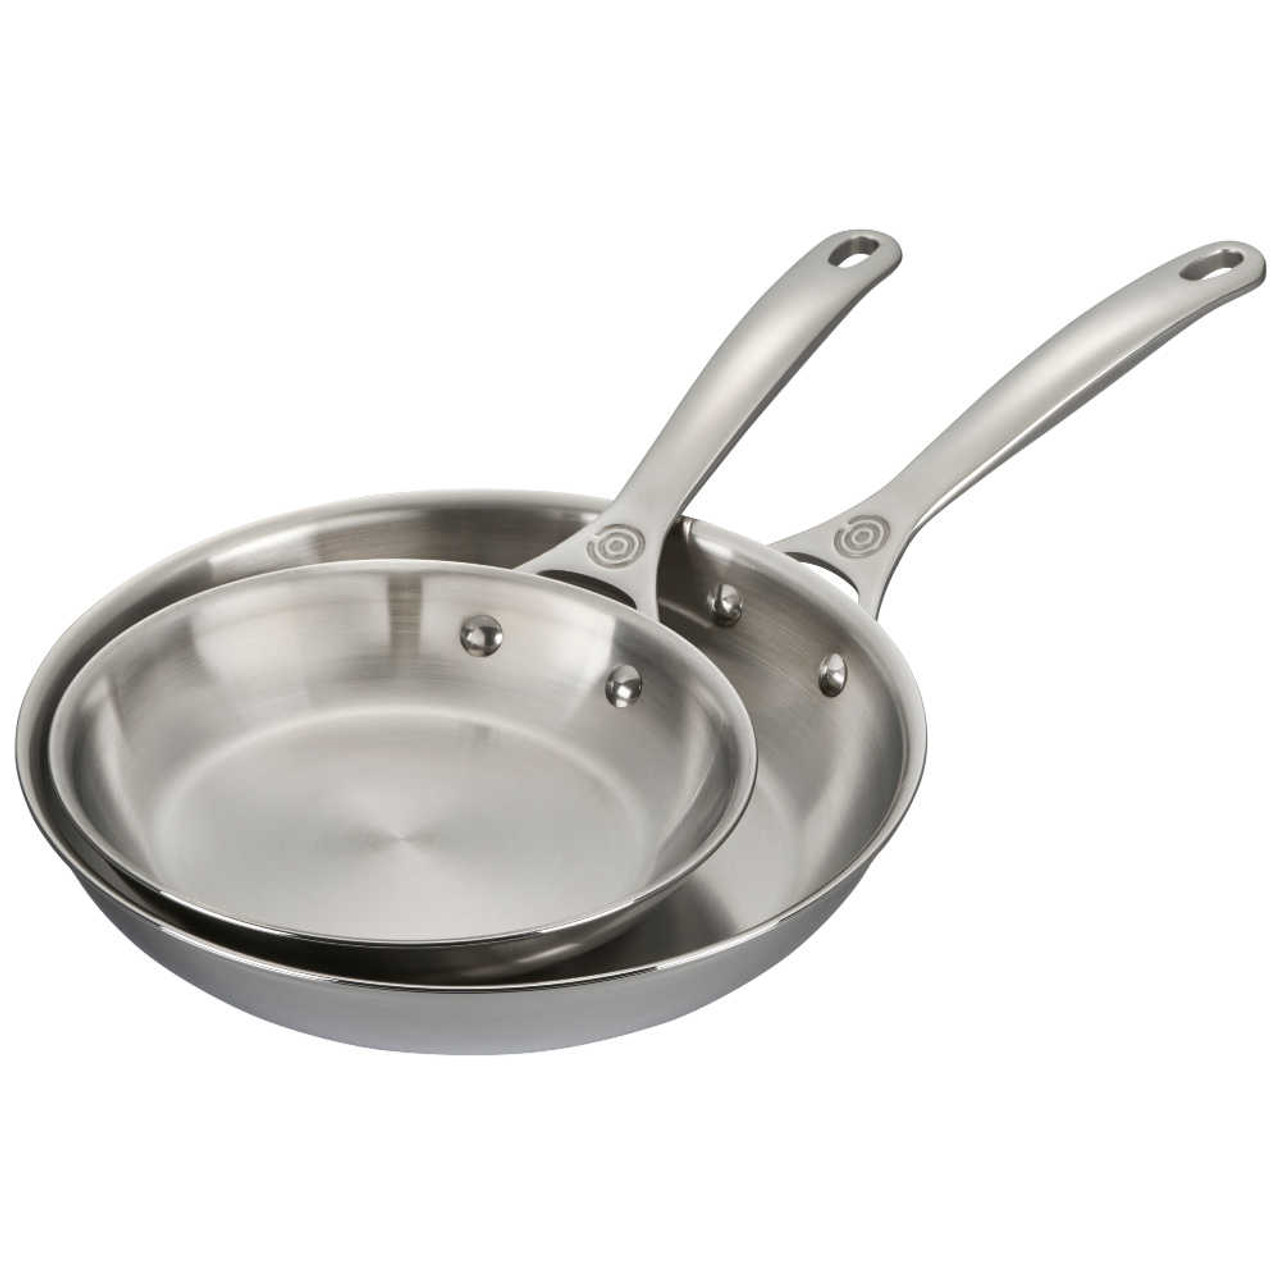 https://cdn11.bigcommerce.com/s-hccytny0od/images/stencil/1280x1280/products/3370/12023/le-creuset-stainless-steel-fry-pan-set__33838.1592436074.jpg?c=2?imbypass=on